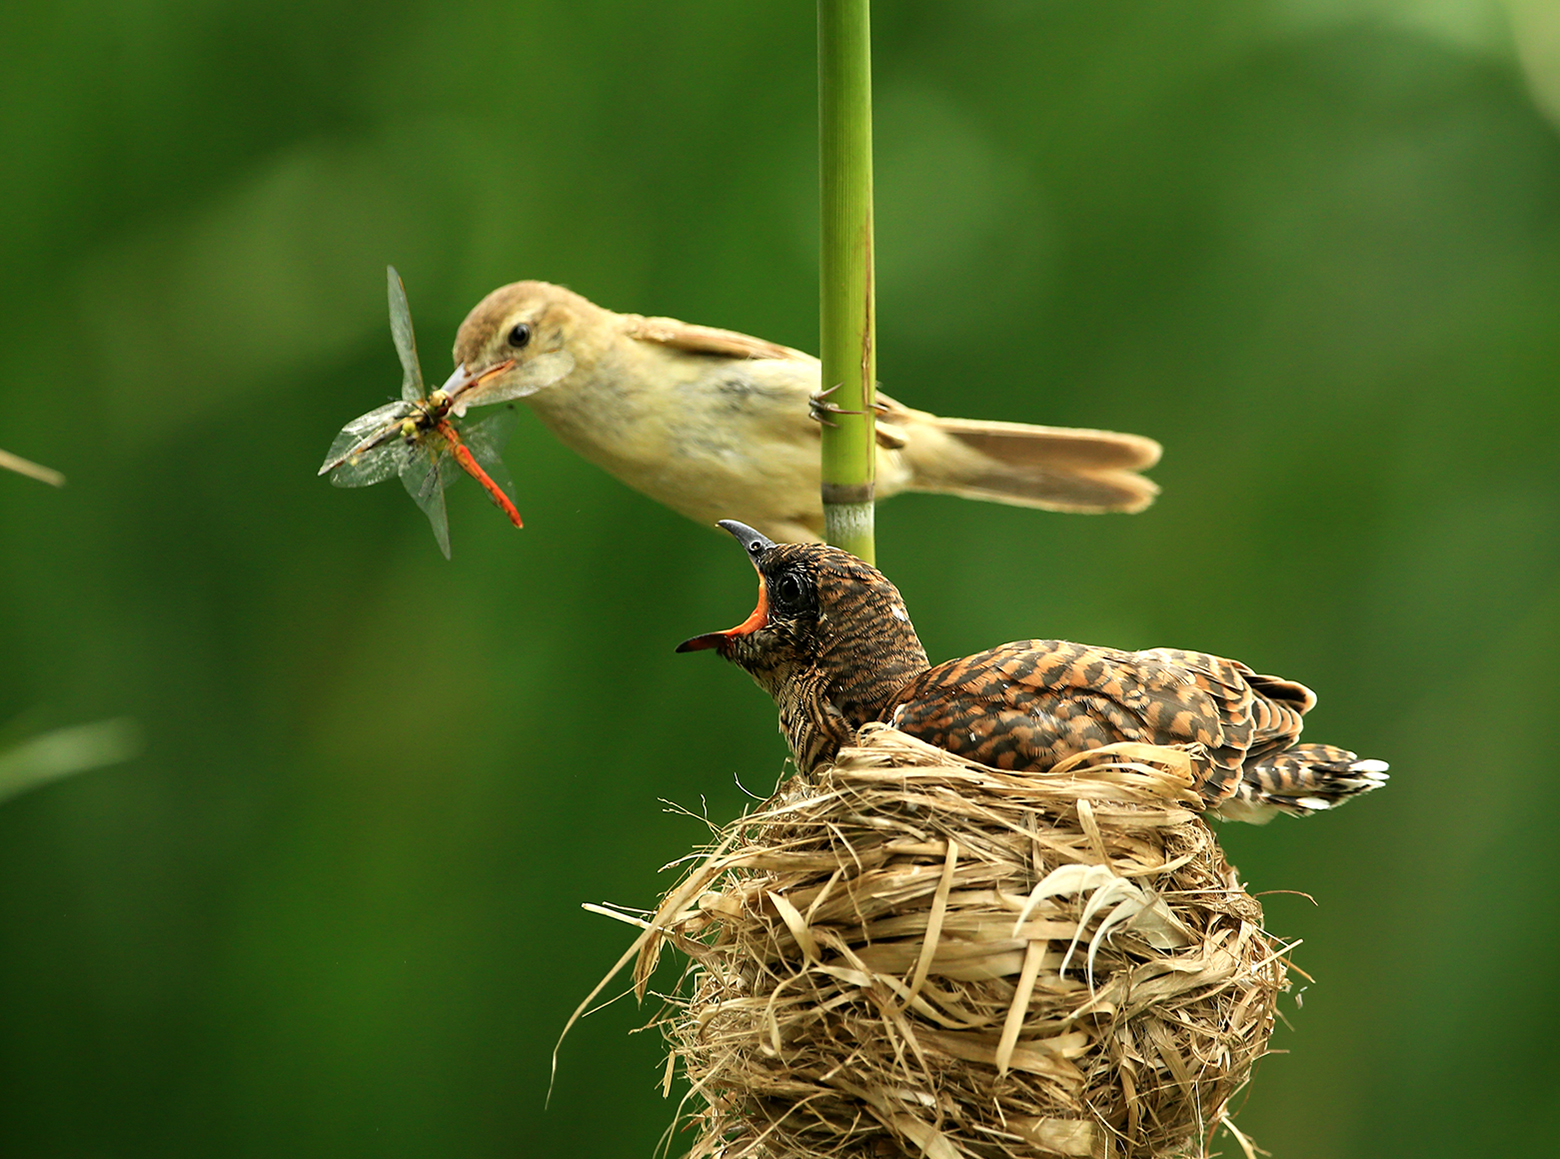 reed warbler feeding a cuckoo chick in the nest